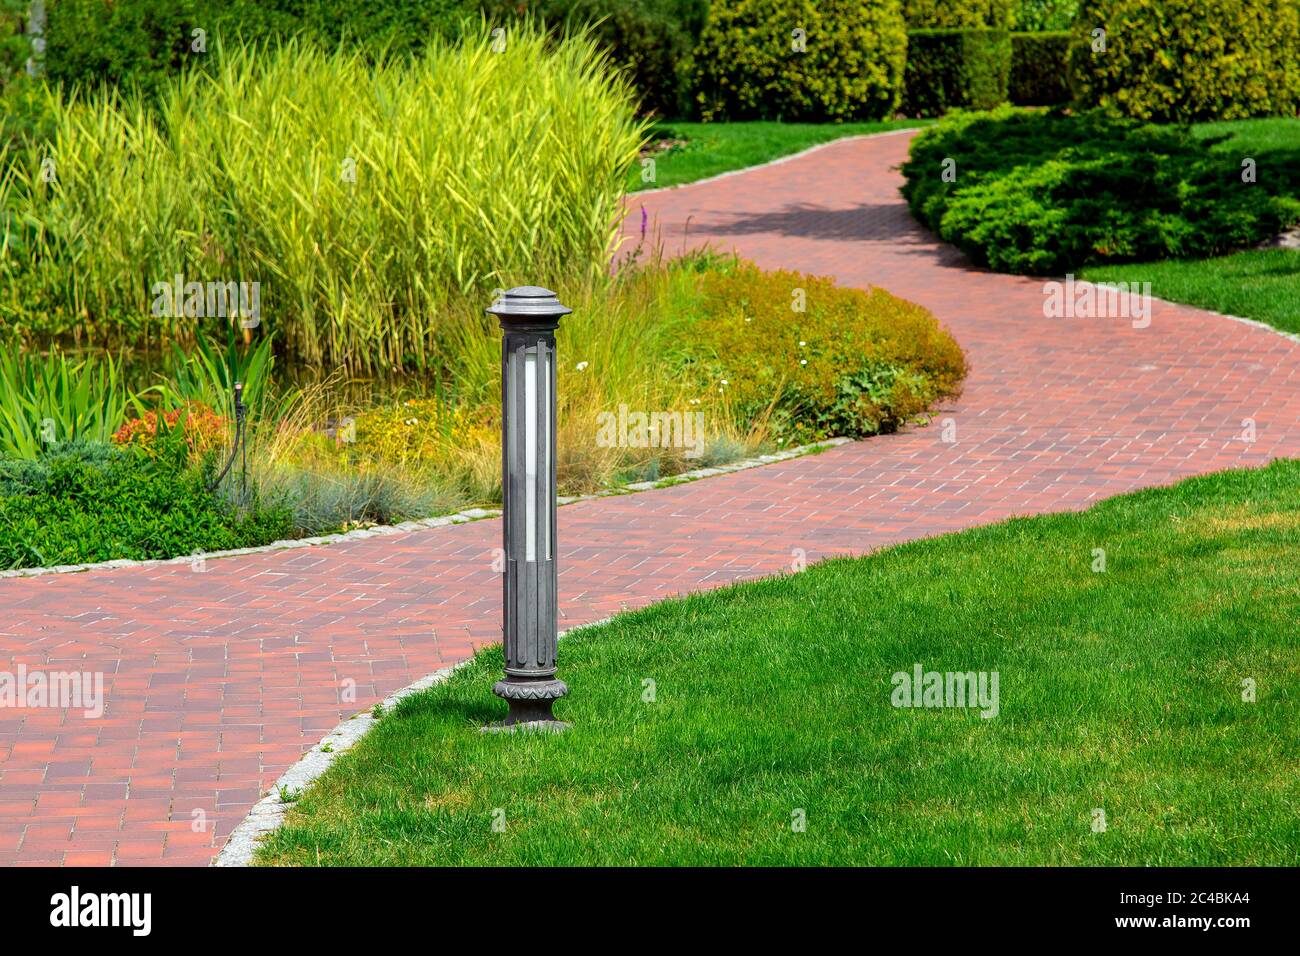 Lighting ground lamp street mounted on a green lawn in a park with